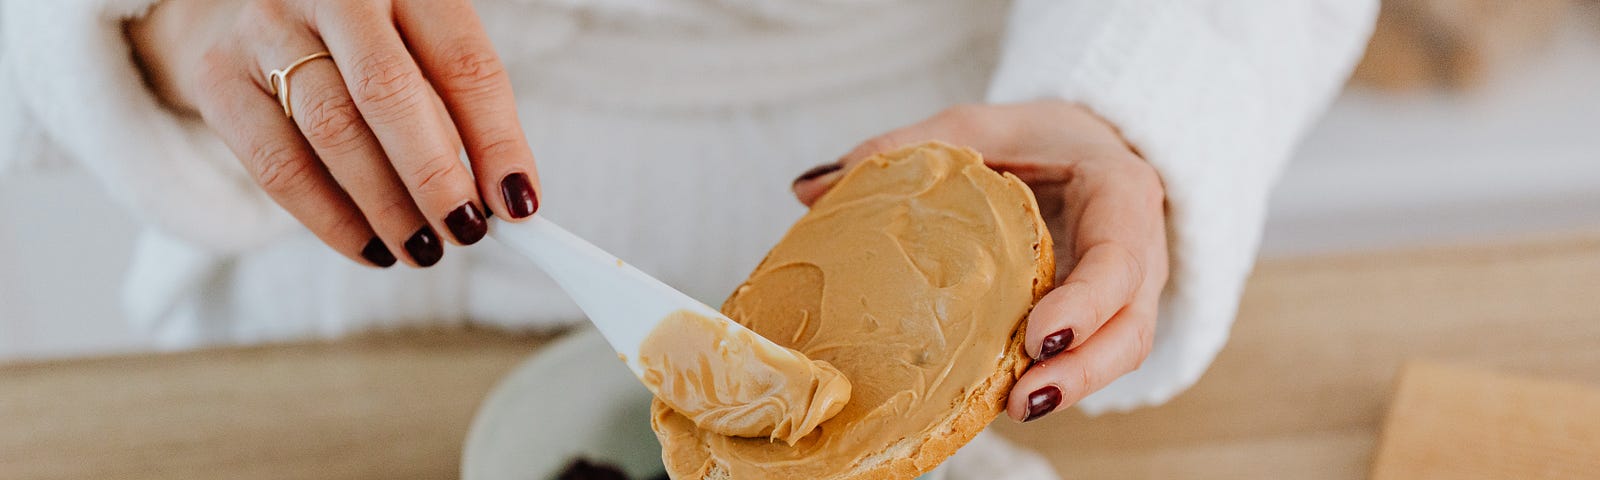 Close up of a person spreading peanut butter on toast.